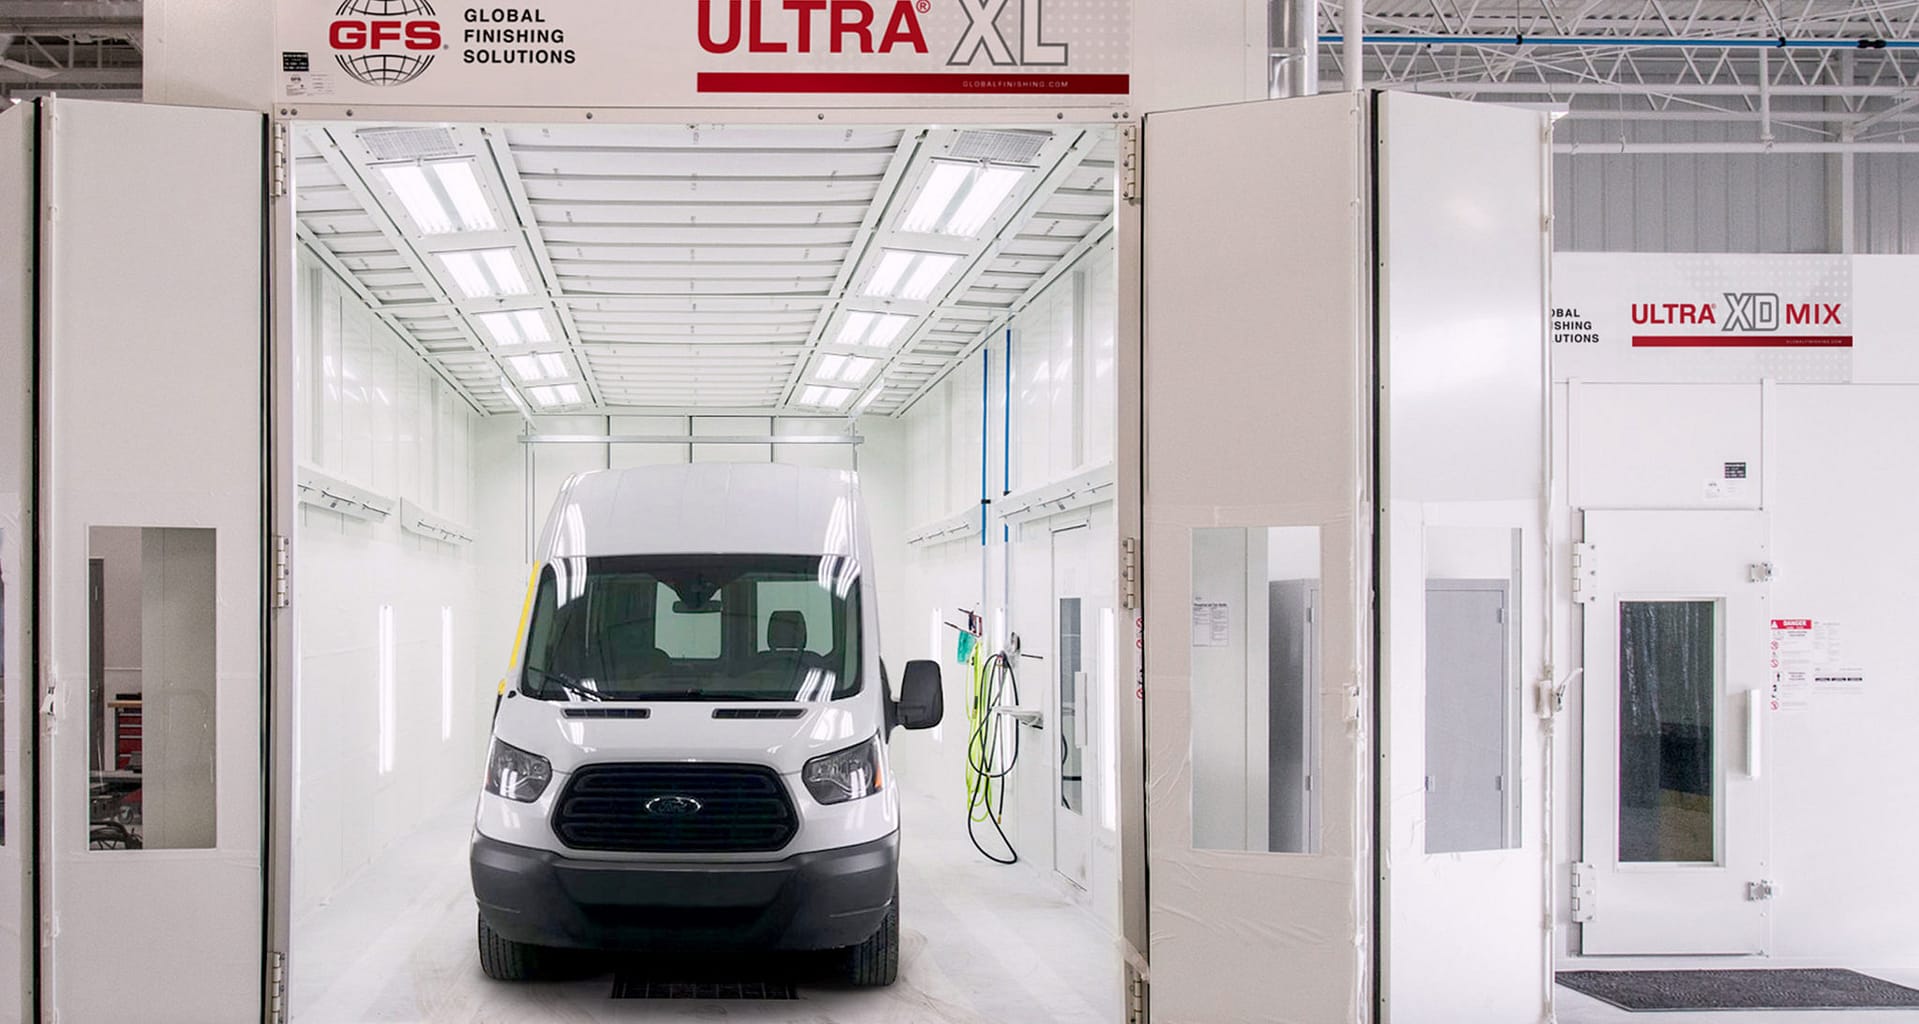 Ultra XL paint booth